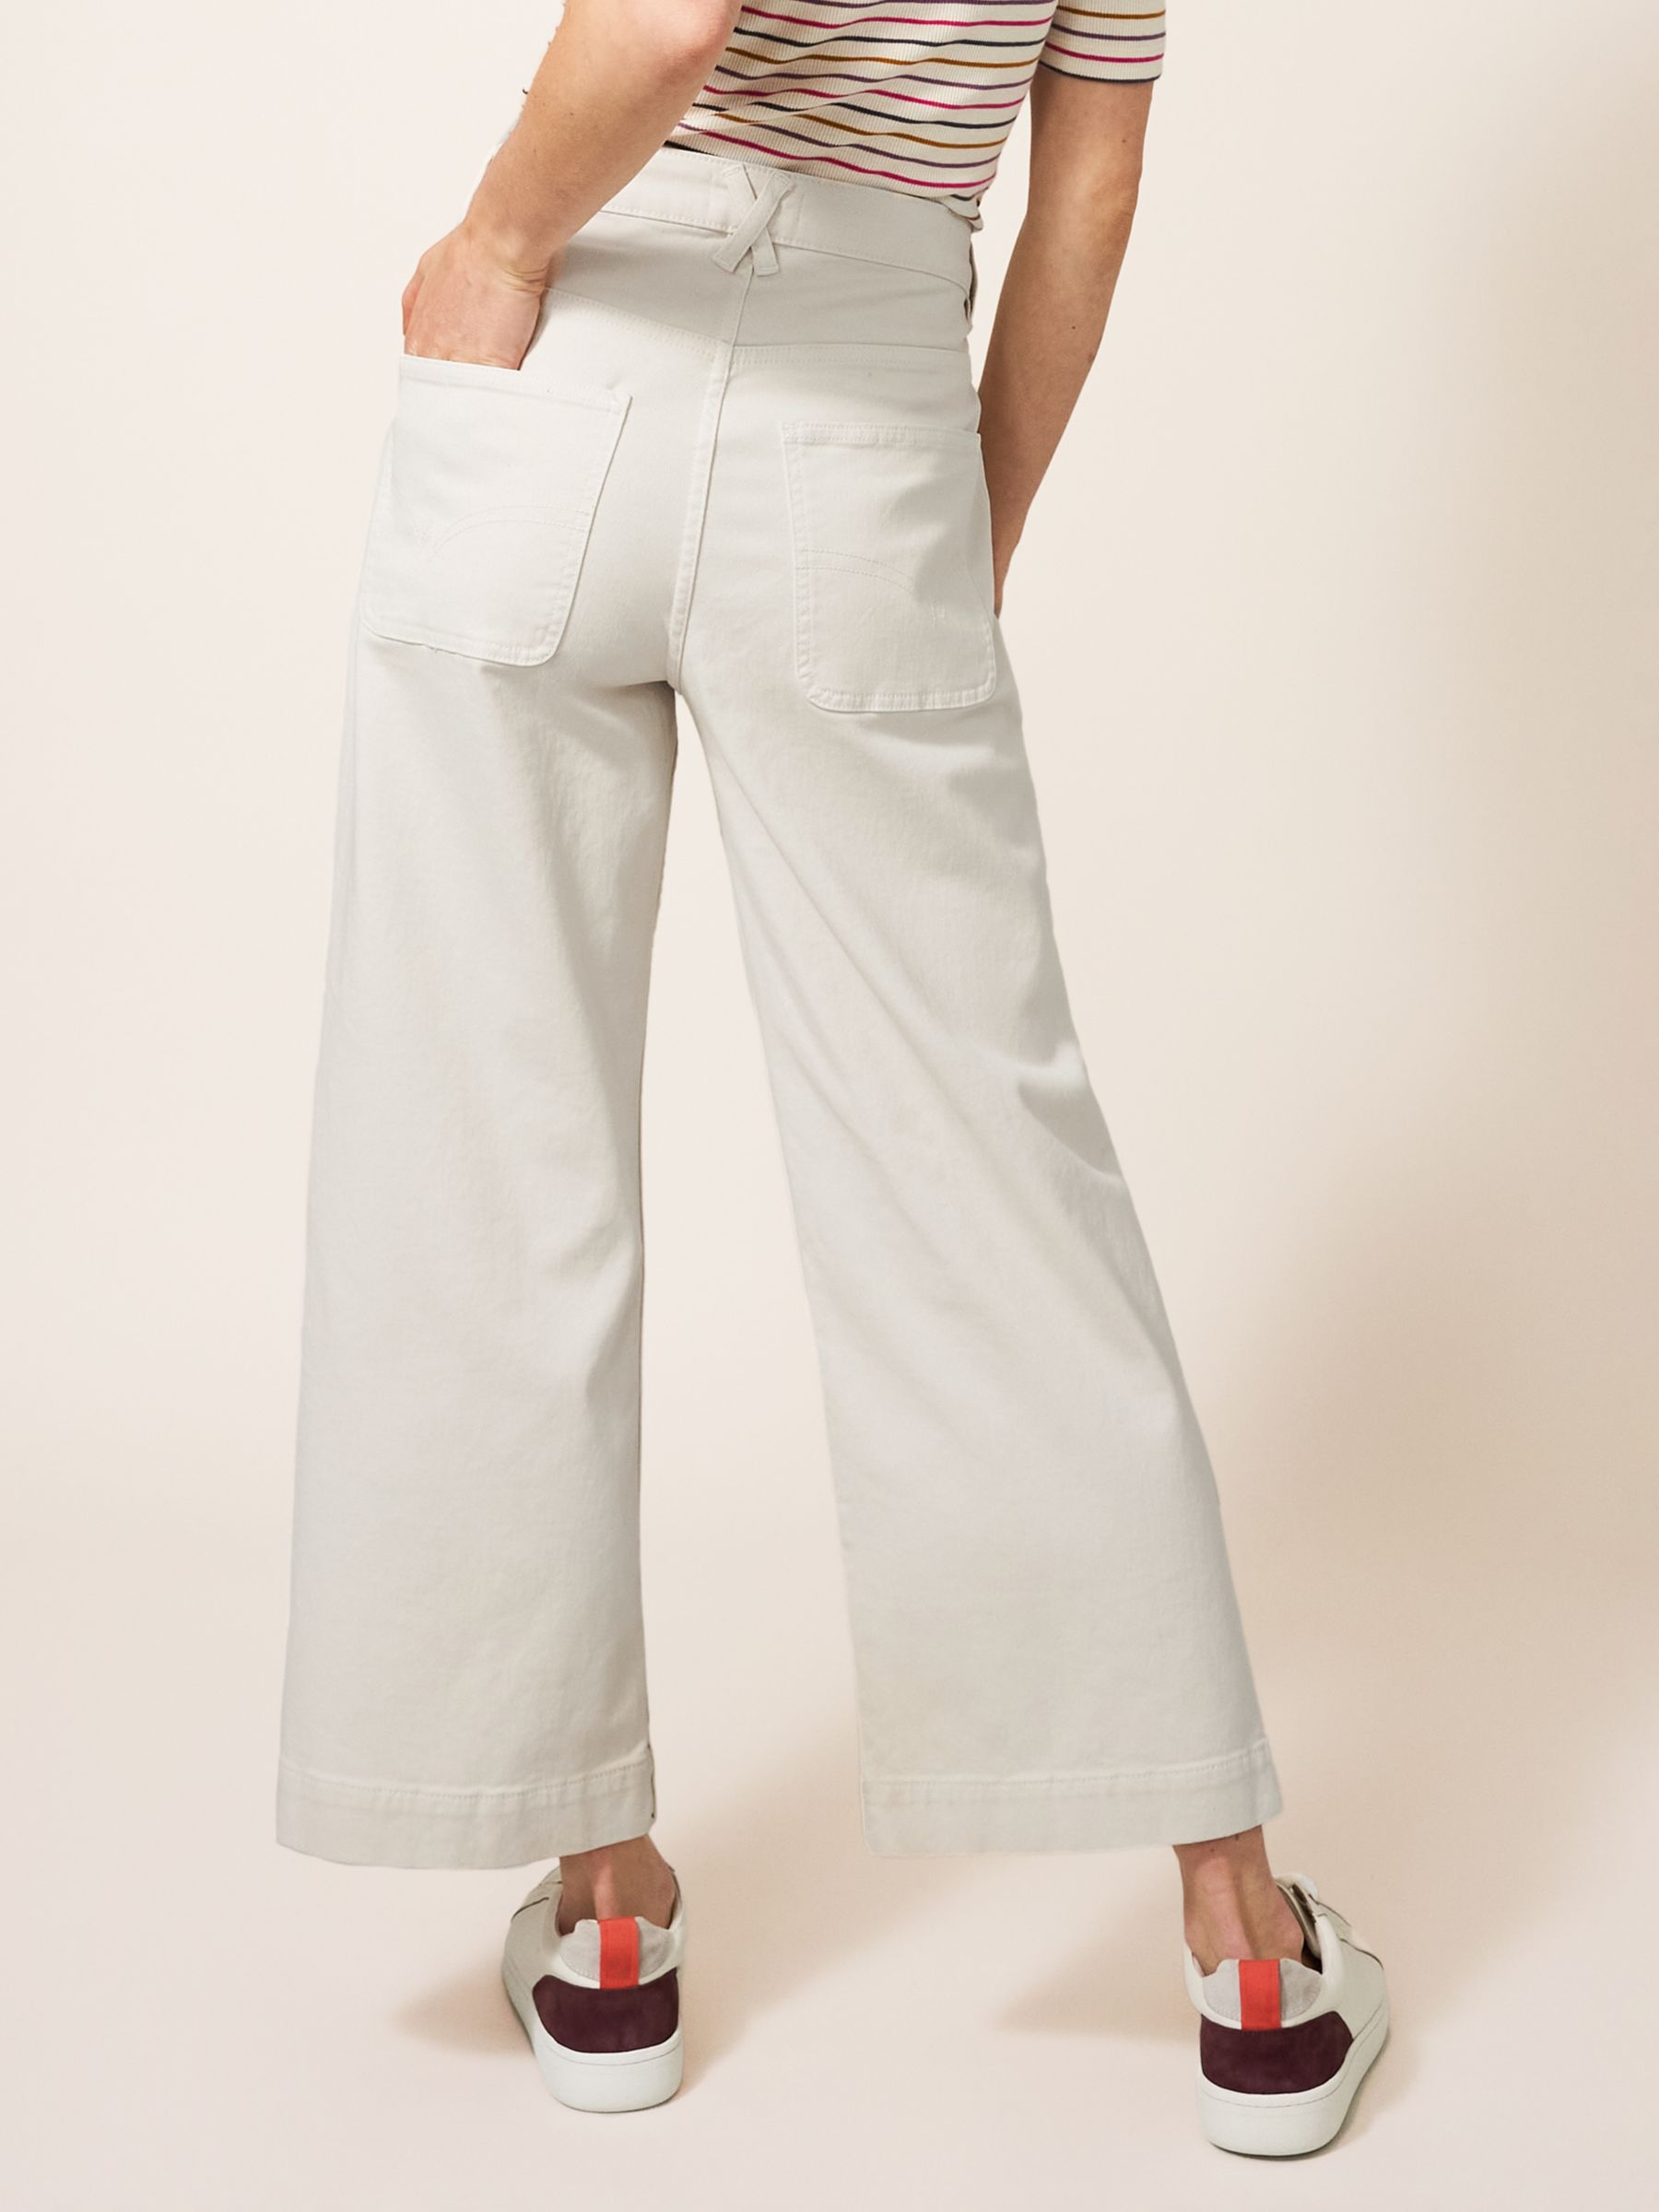 Buy White Stuff Plain Wide Leg Cropped Jeans Online at johnlewis.com